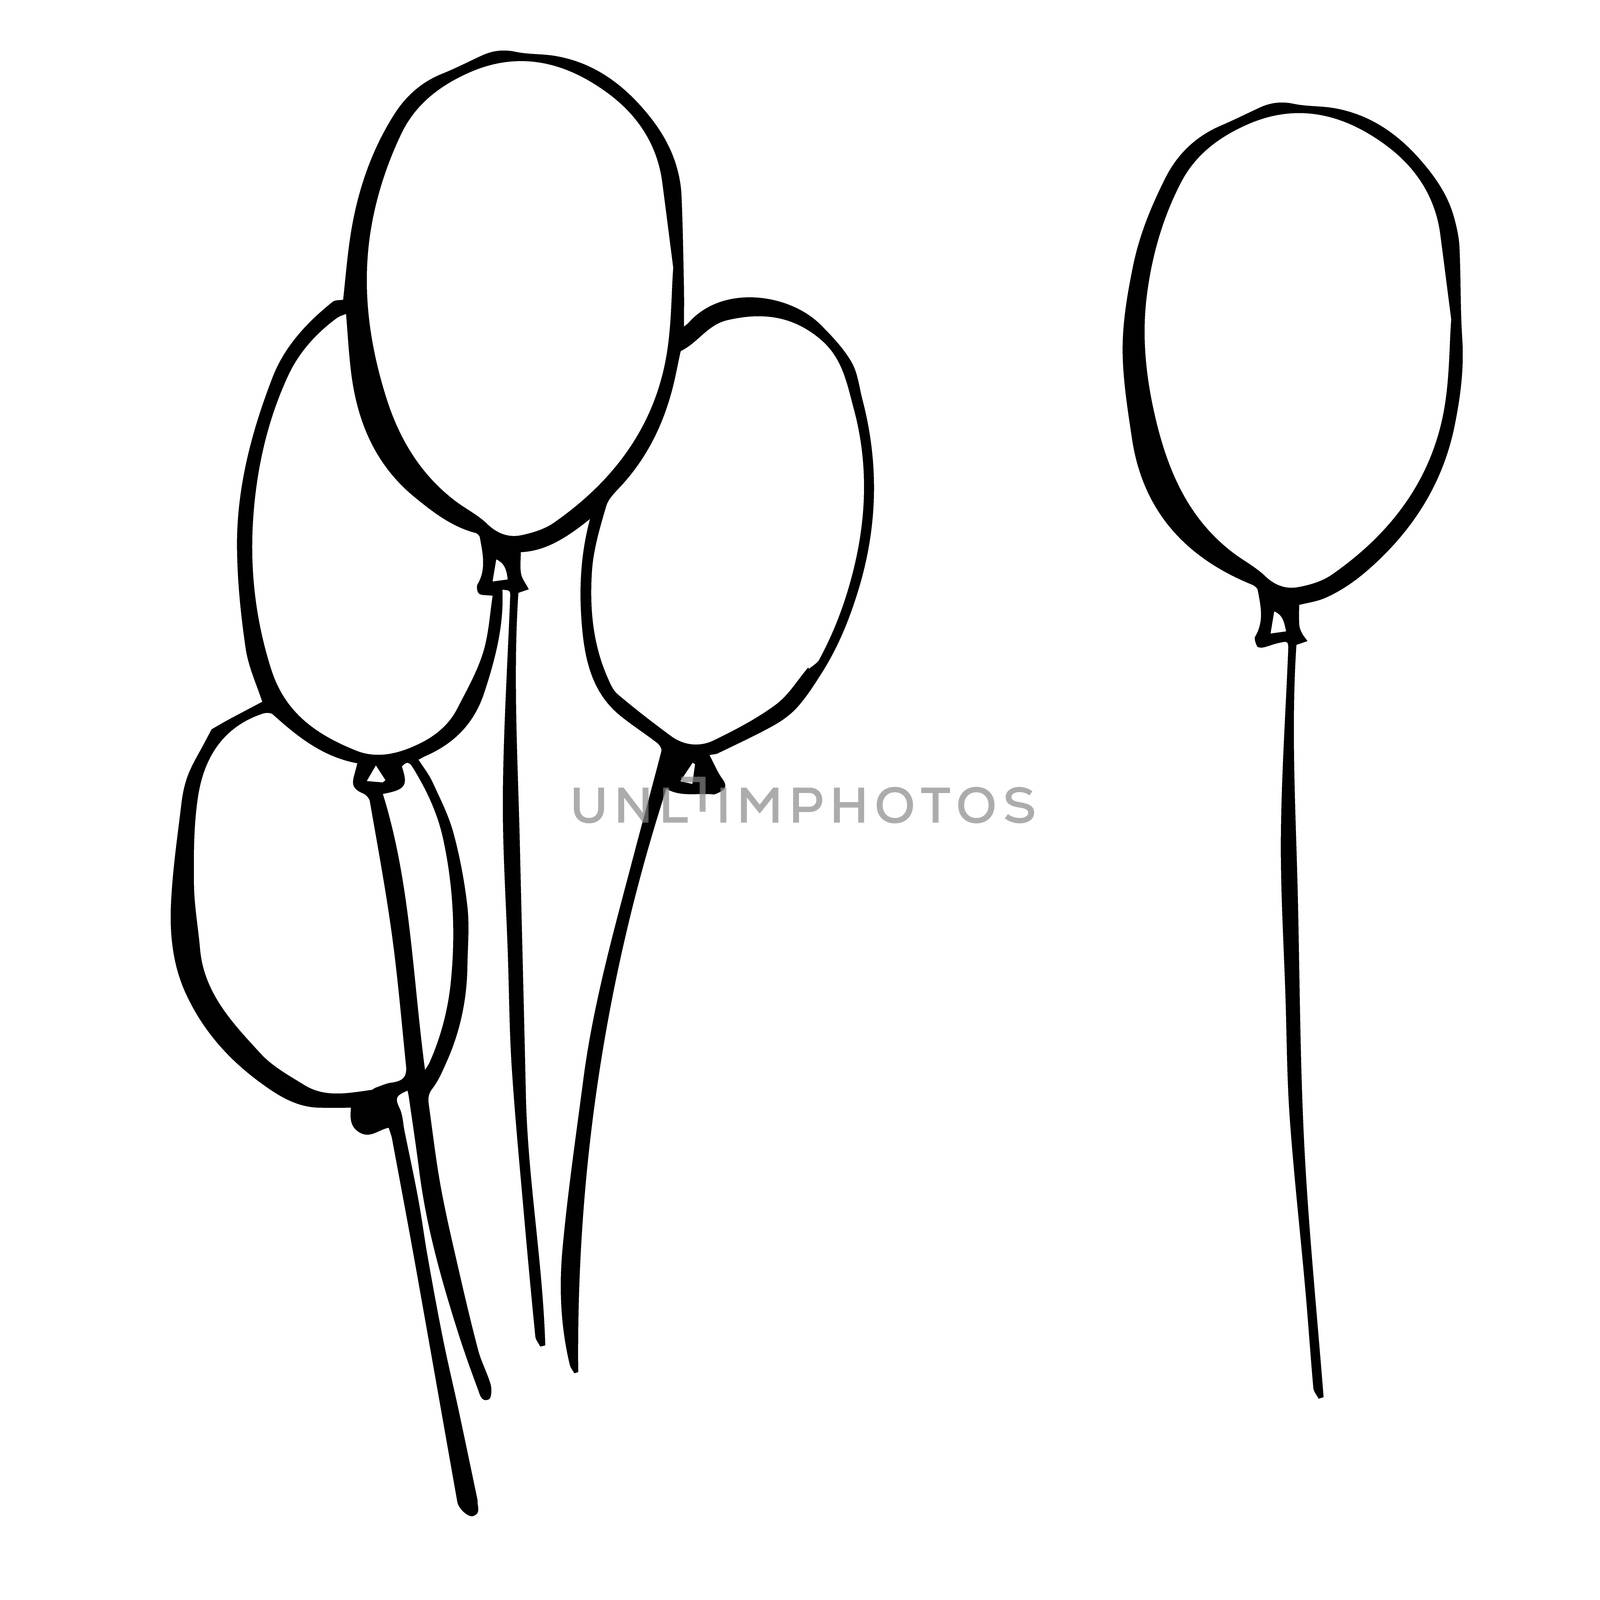 freehand sketch illustration of balloons by simpleBE